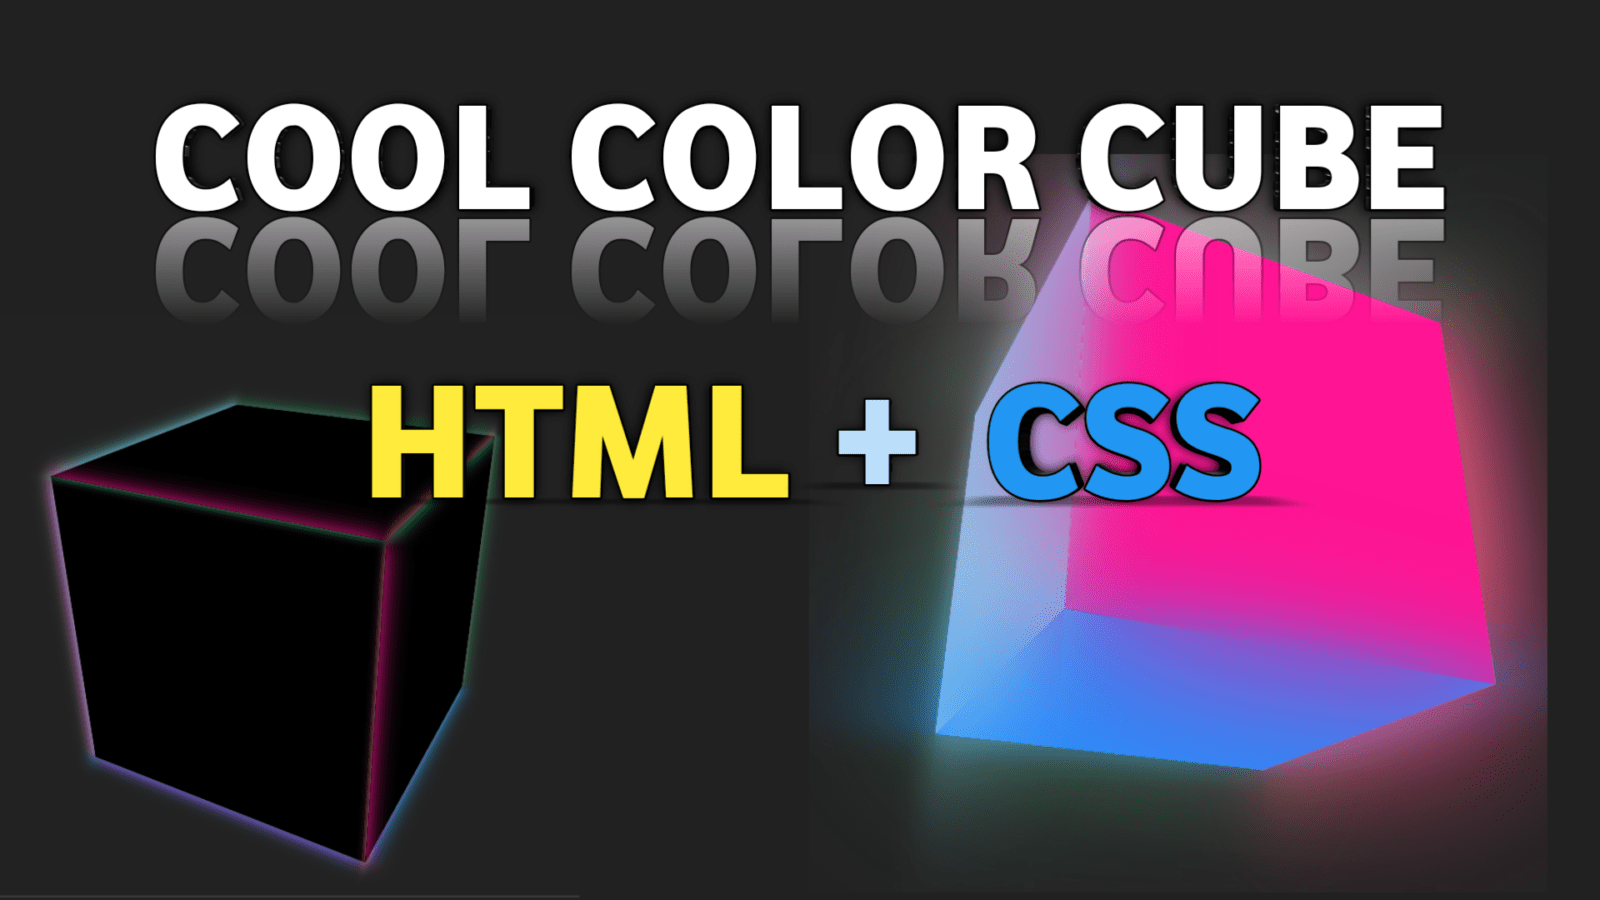 Creating Mesmerizing COOL COLOR 3D CUBE Animation with HTML and CSS 🌈✨